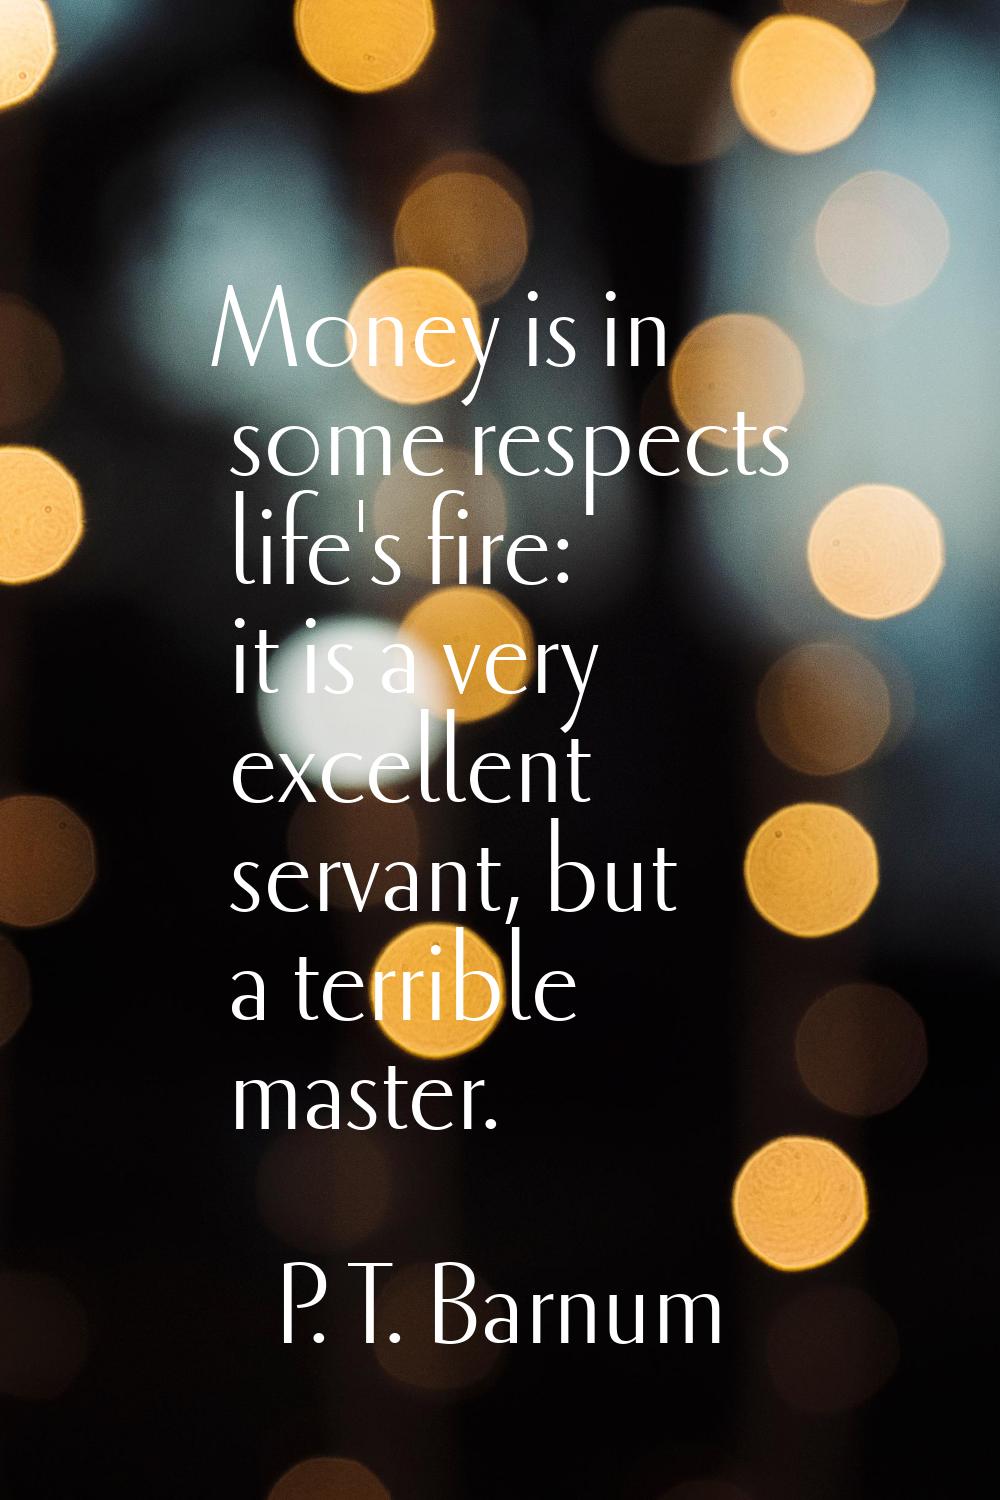 Money is in some respects life's fire: it is a very excellent servant, but a terrible master.